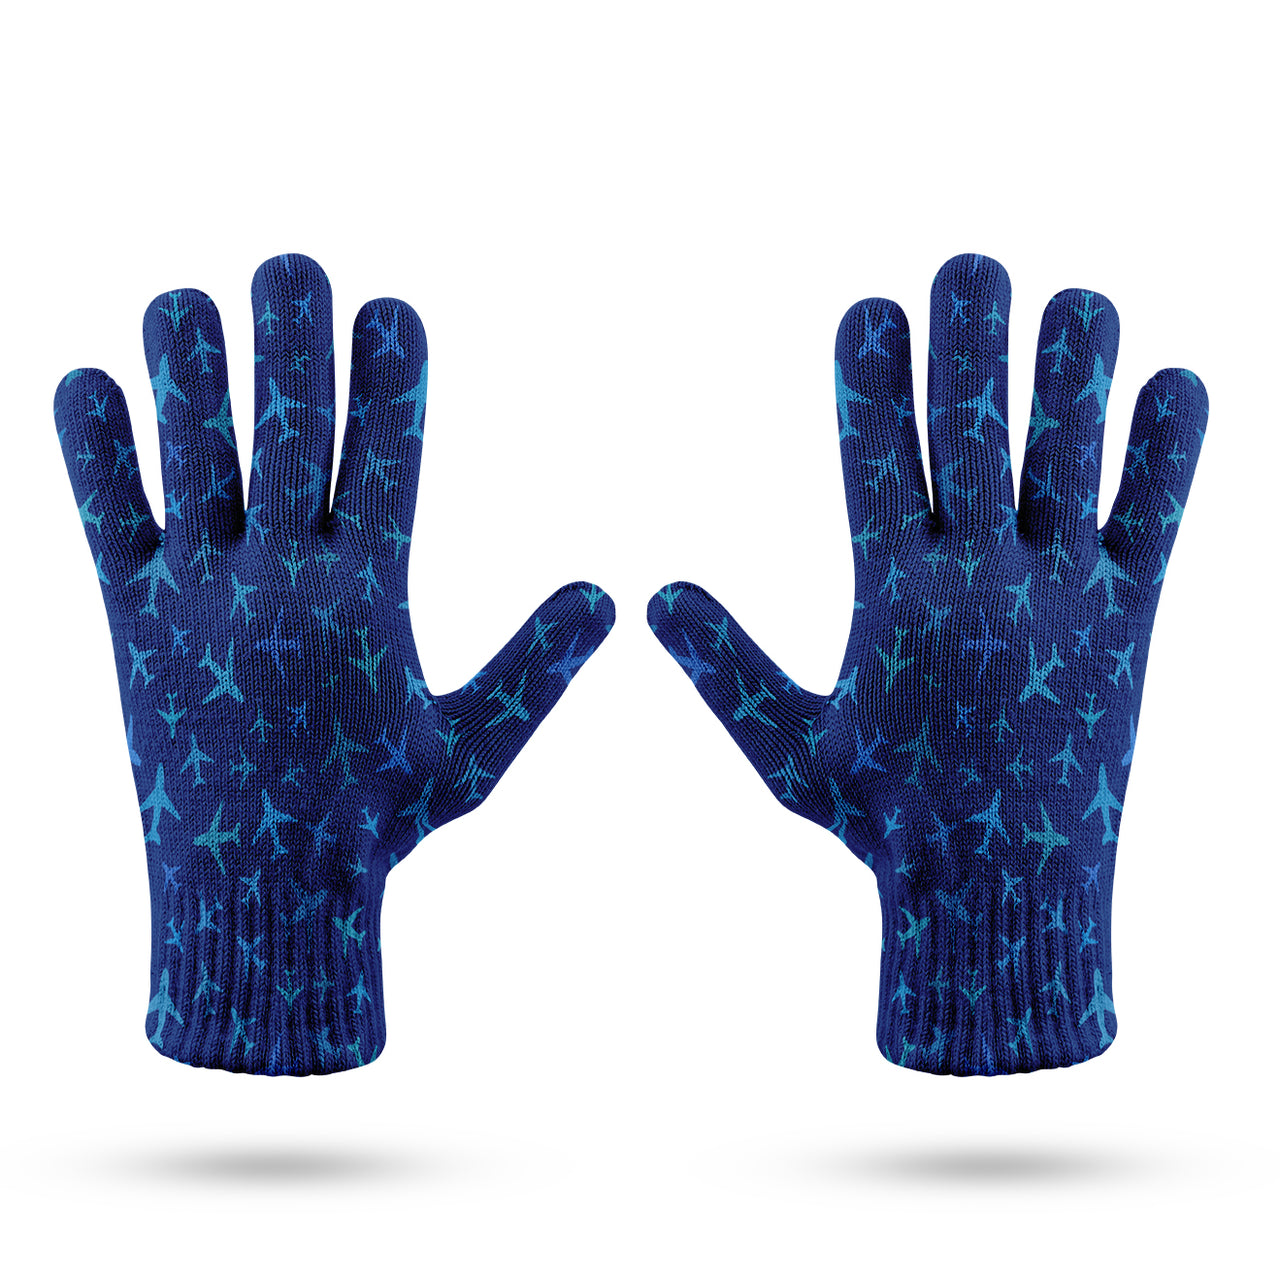 Many Airplanes Blue Designed Gloves